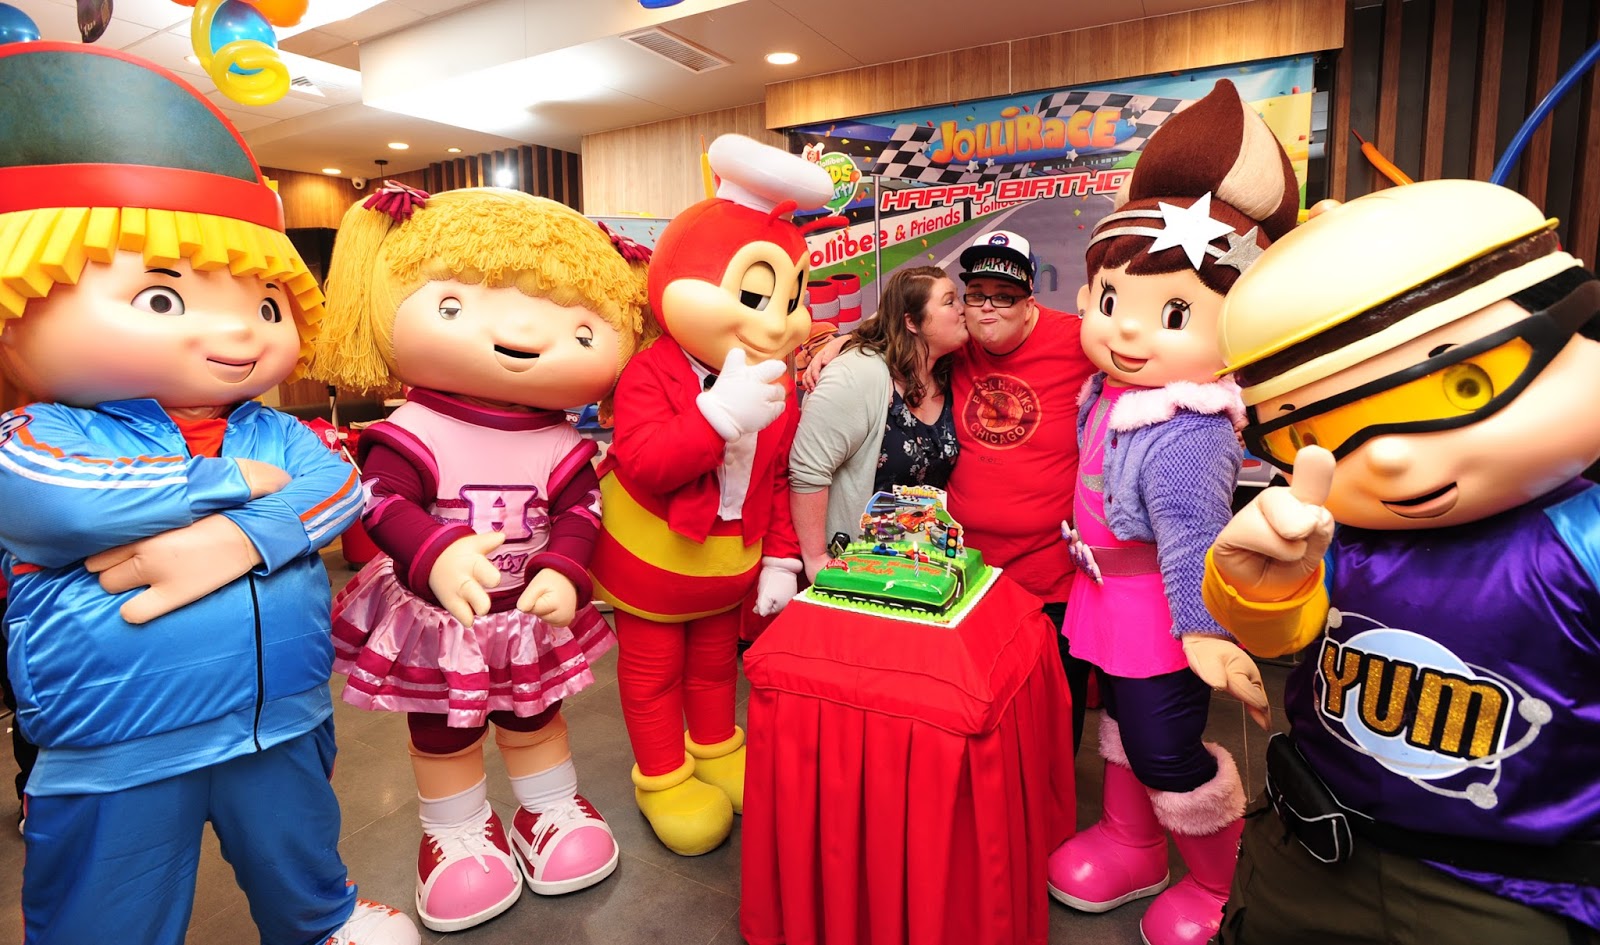 Hugknucklestv celebrated a jolliest party with fans at jollibee bgc triangl...